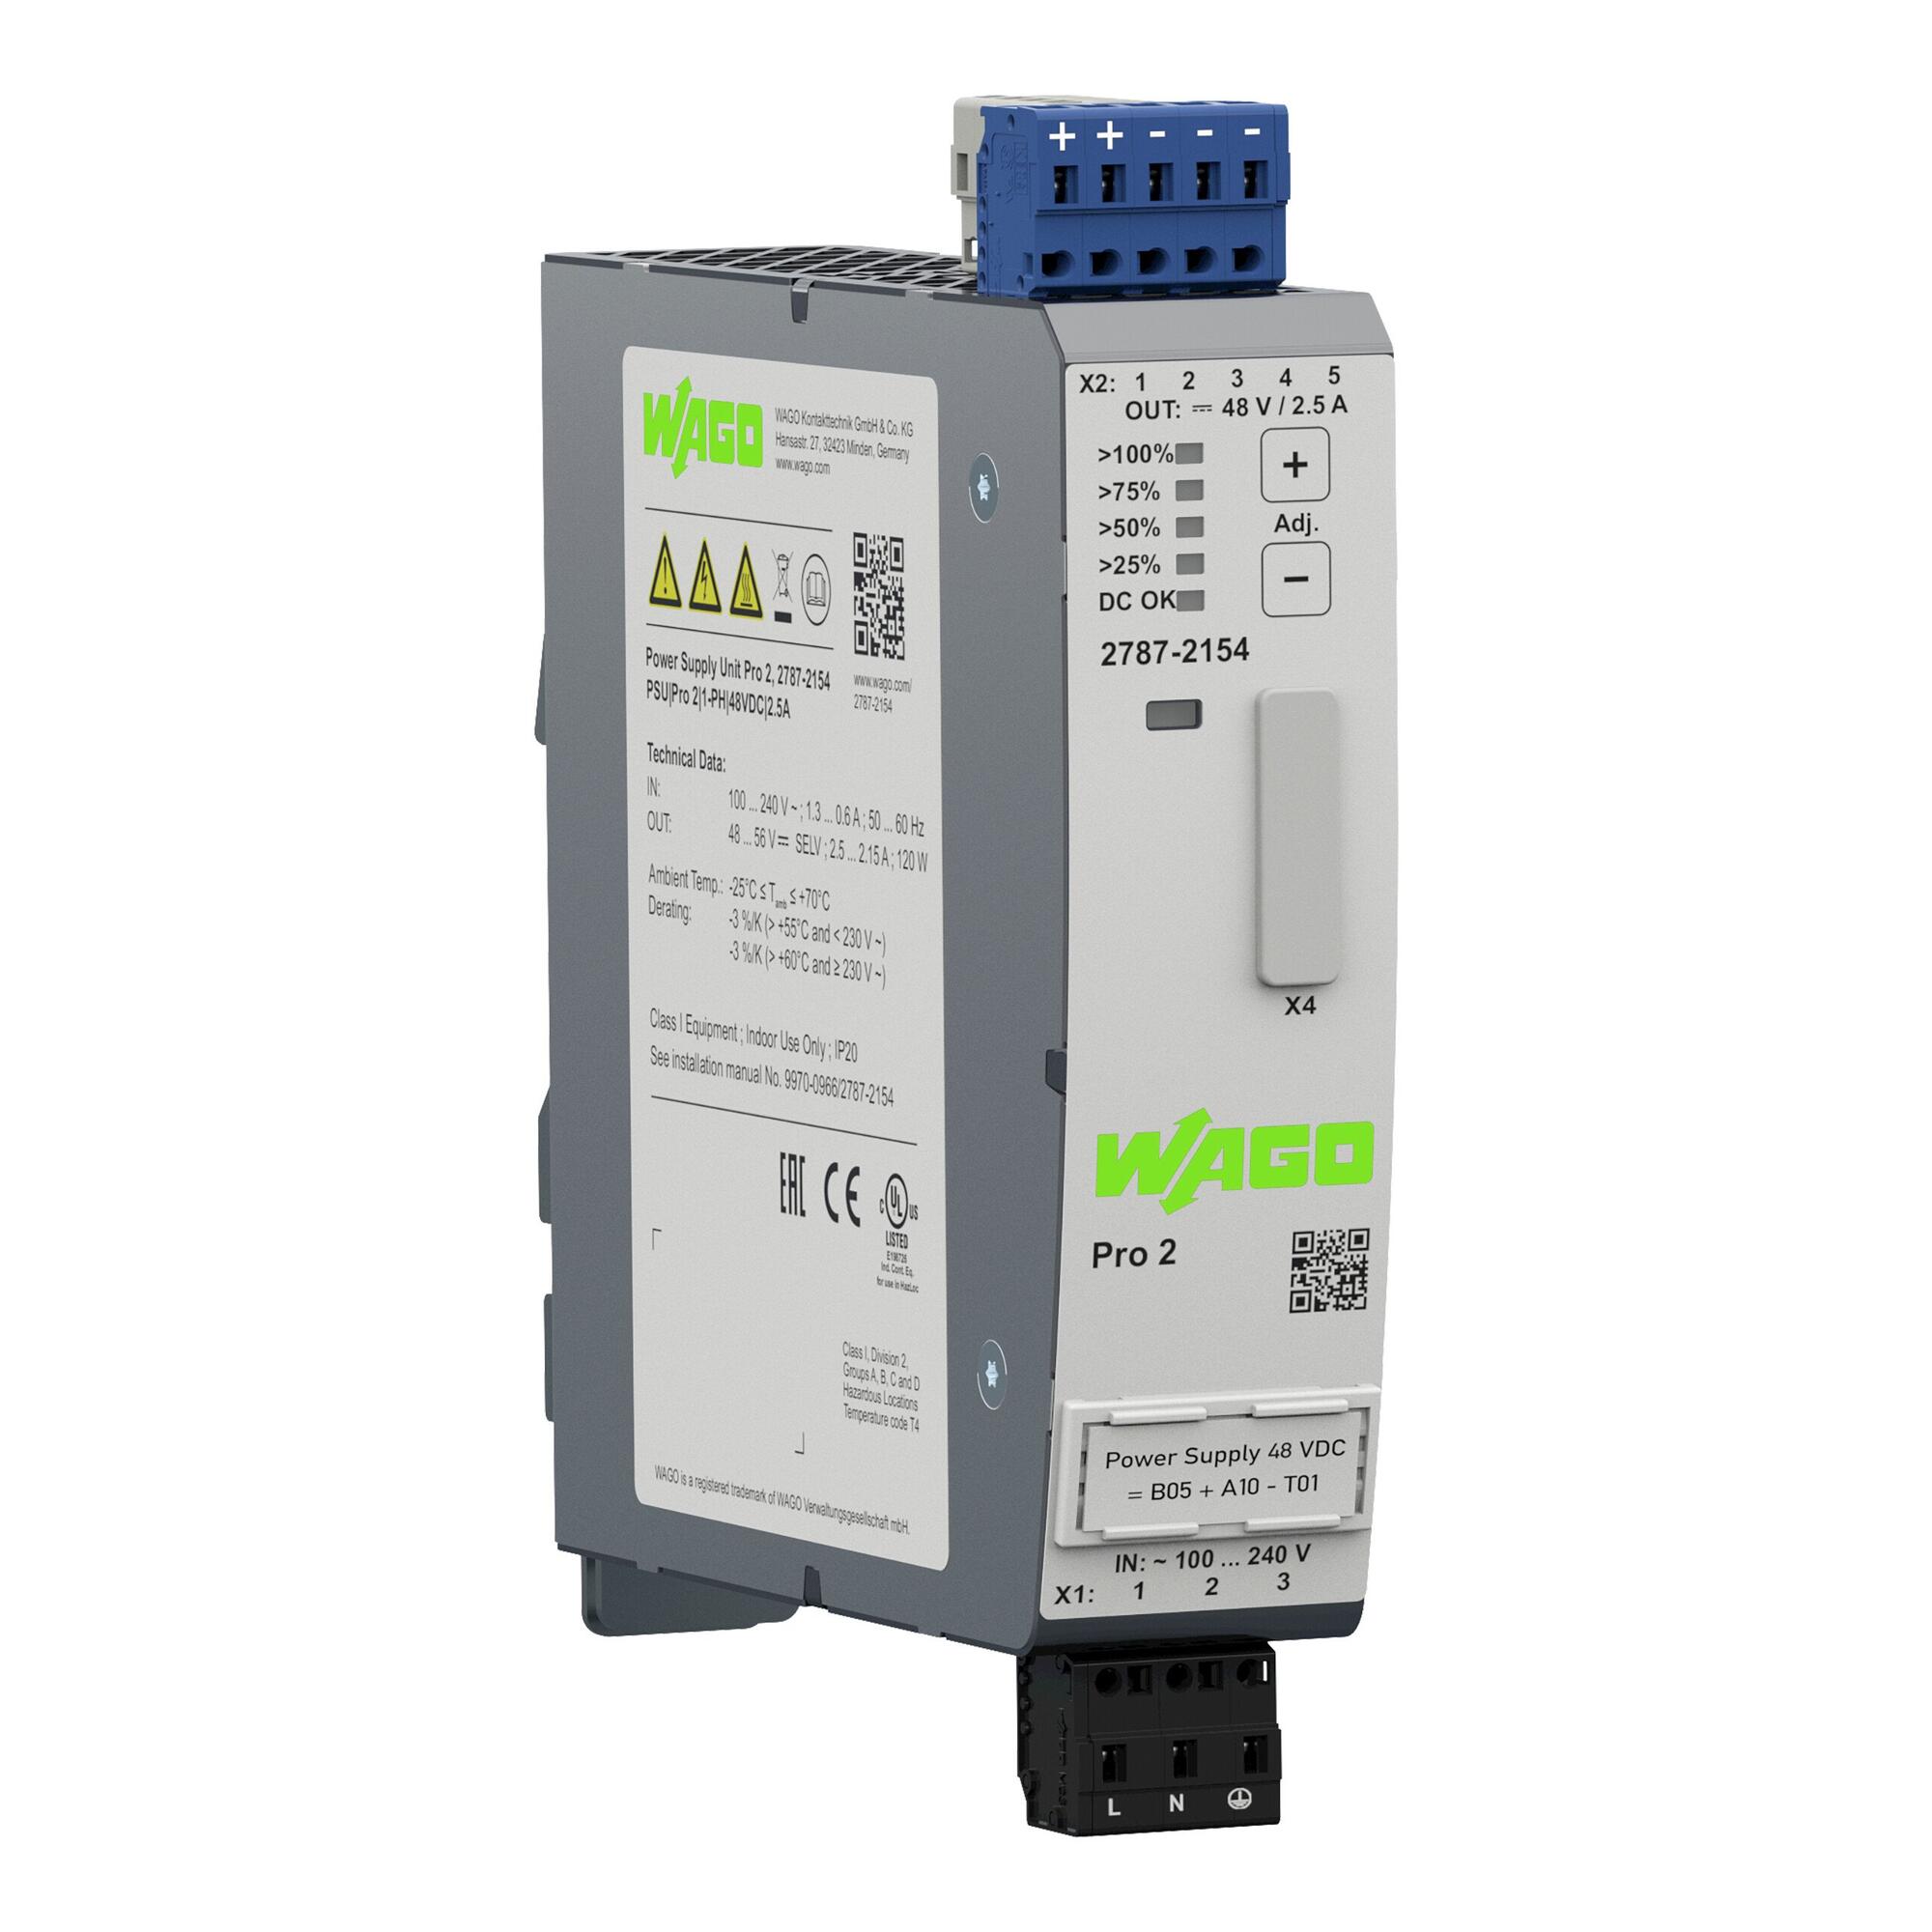 Power supply; Pro 2; 1-phase; 48 VDC output voltage; 2.5 A output current; TopBoost + PowerBoost; communication capability